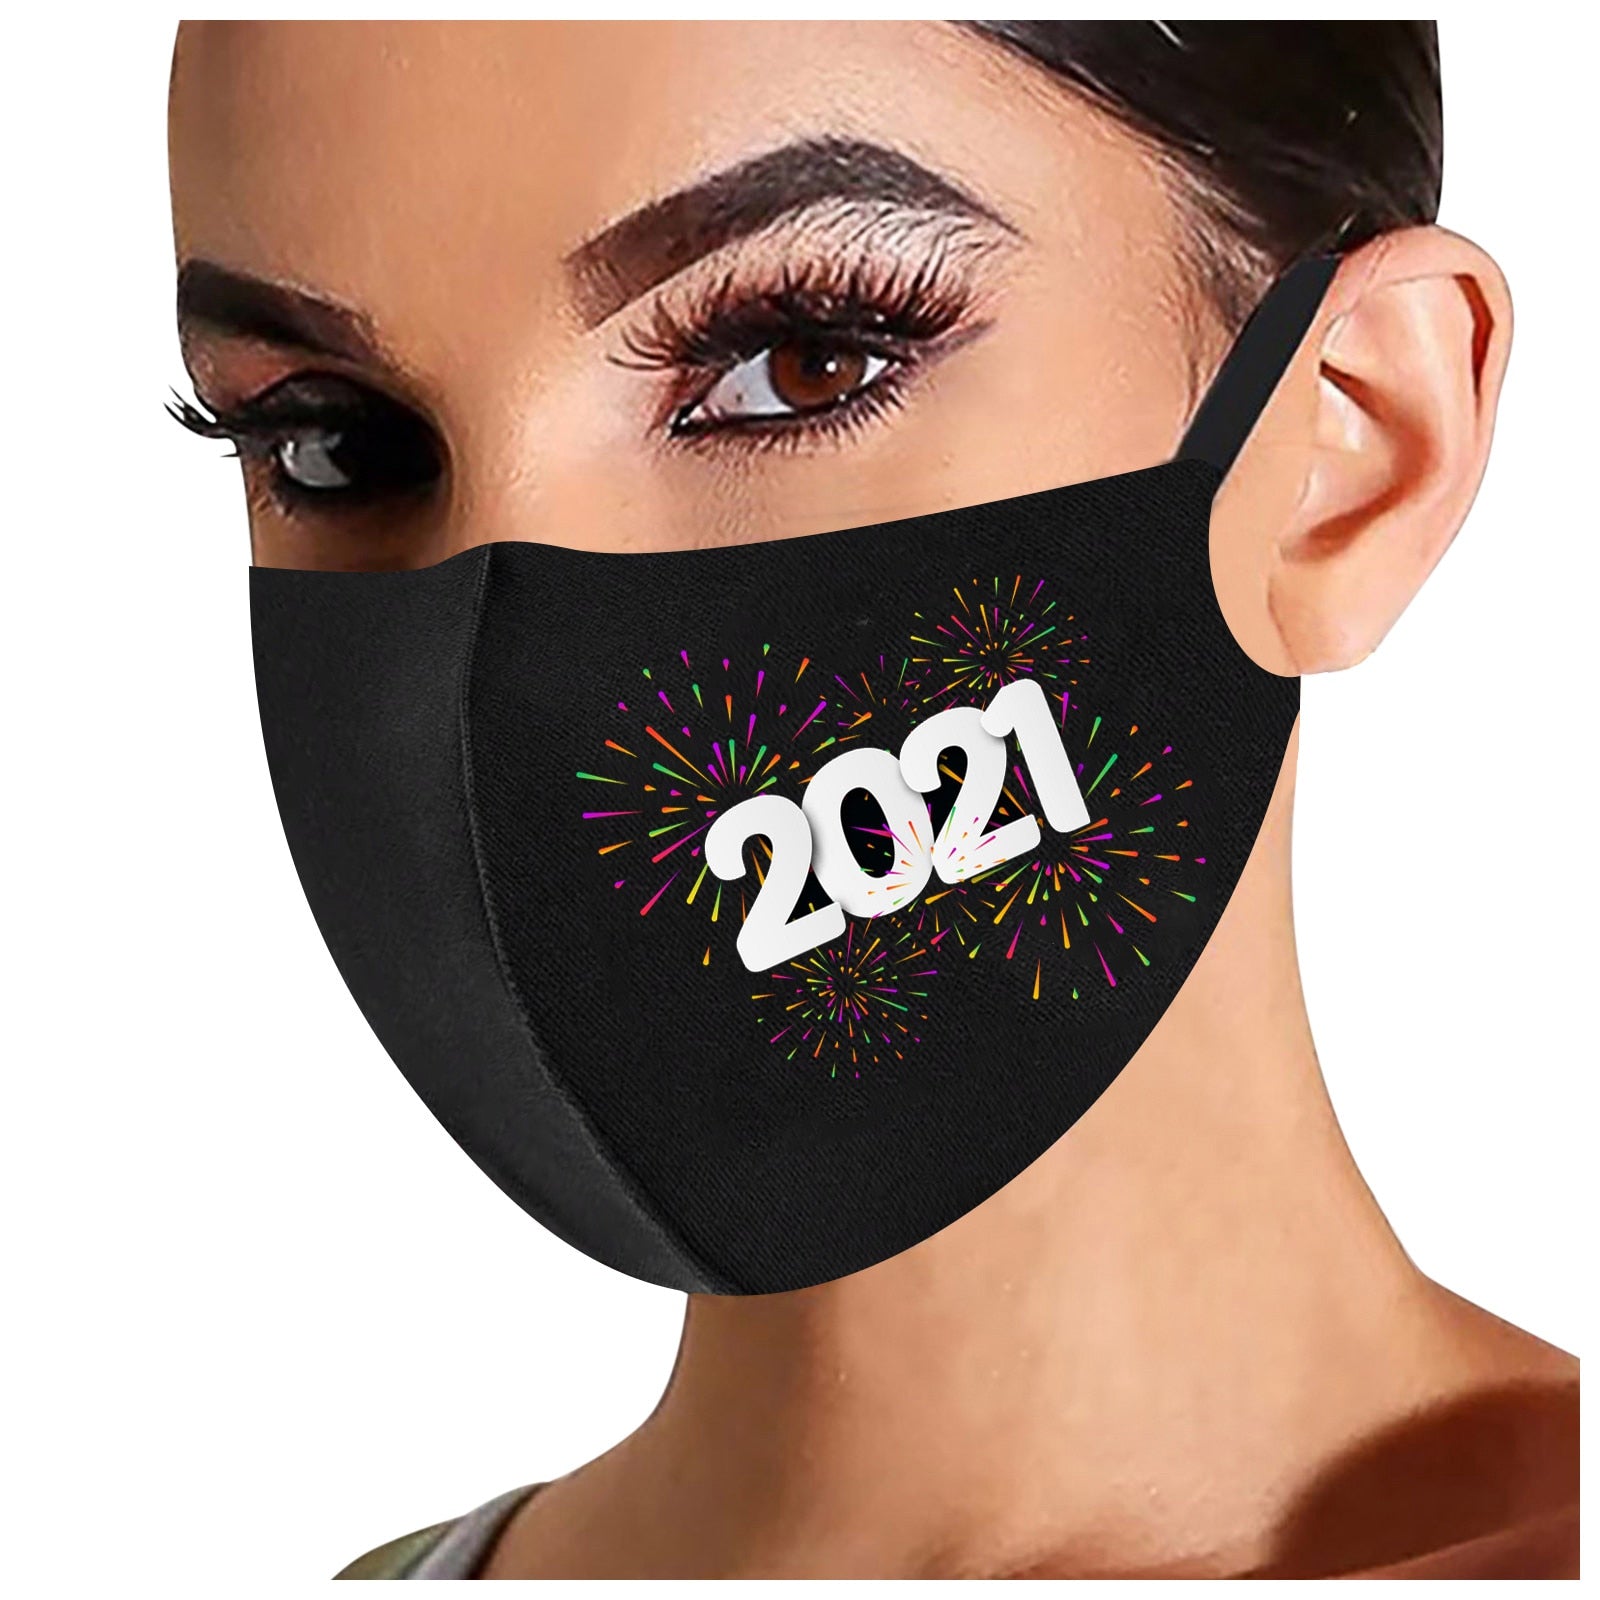 Fashion Washable Reusable Pollution Cover Face Masks For Face With Adult Halloween Cosplay 2021 Happy New Years Cutton Mask